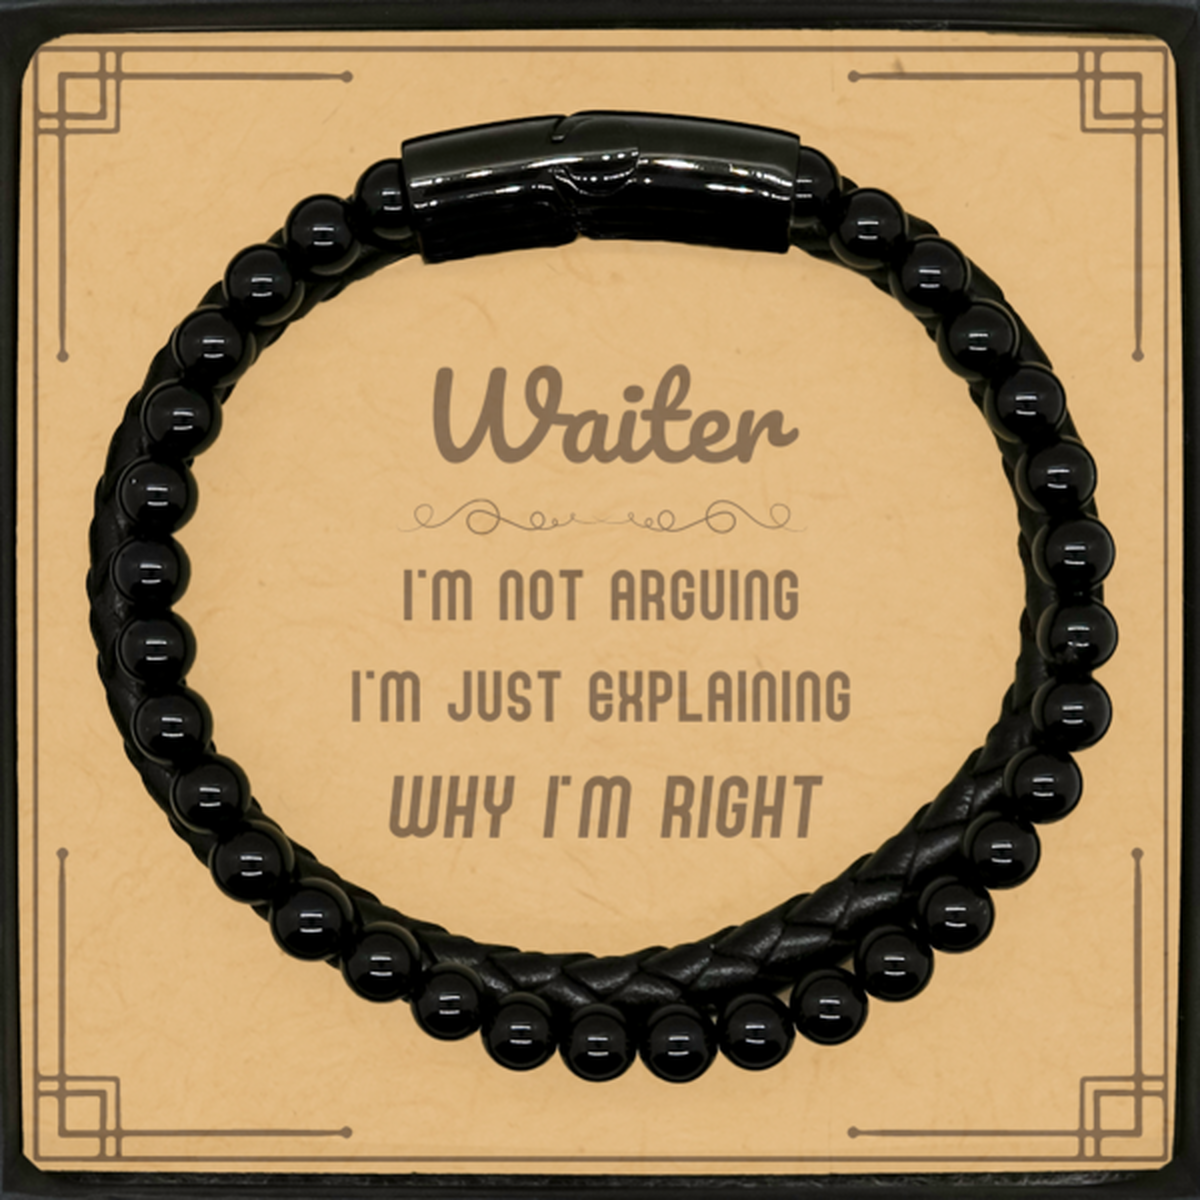 Waiter I'm not Arguing. I'm Just Explaining Why I'm RIGHT Stone Leather Bracelets, Funny Saying Quote Waiter Gifts For Waiter Message Card Graduation Birthday Christmas Gifts for Men Women Coworker